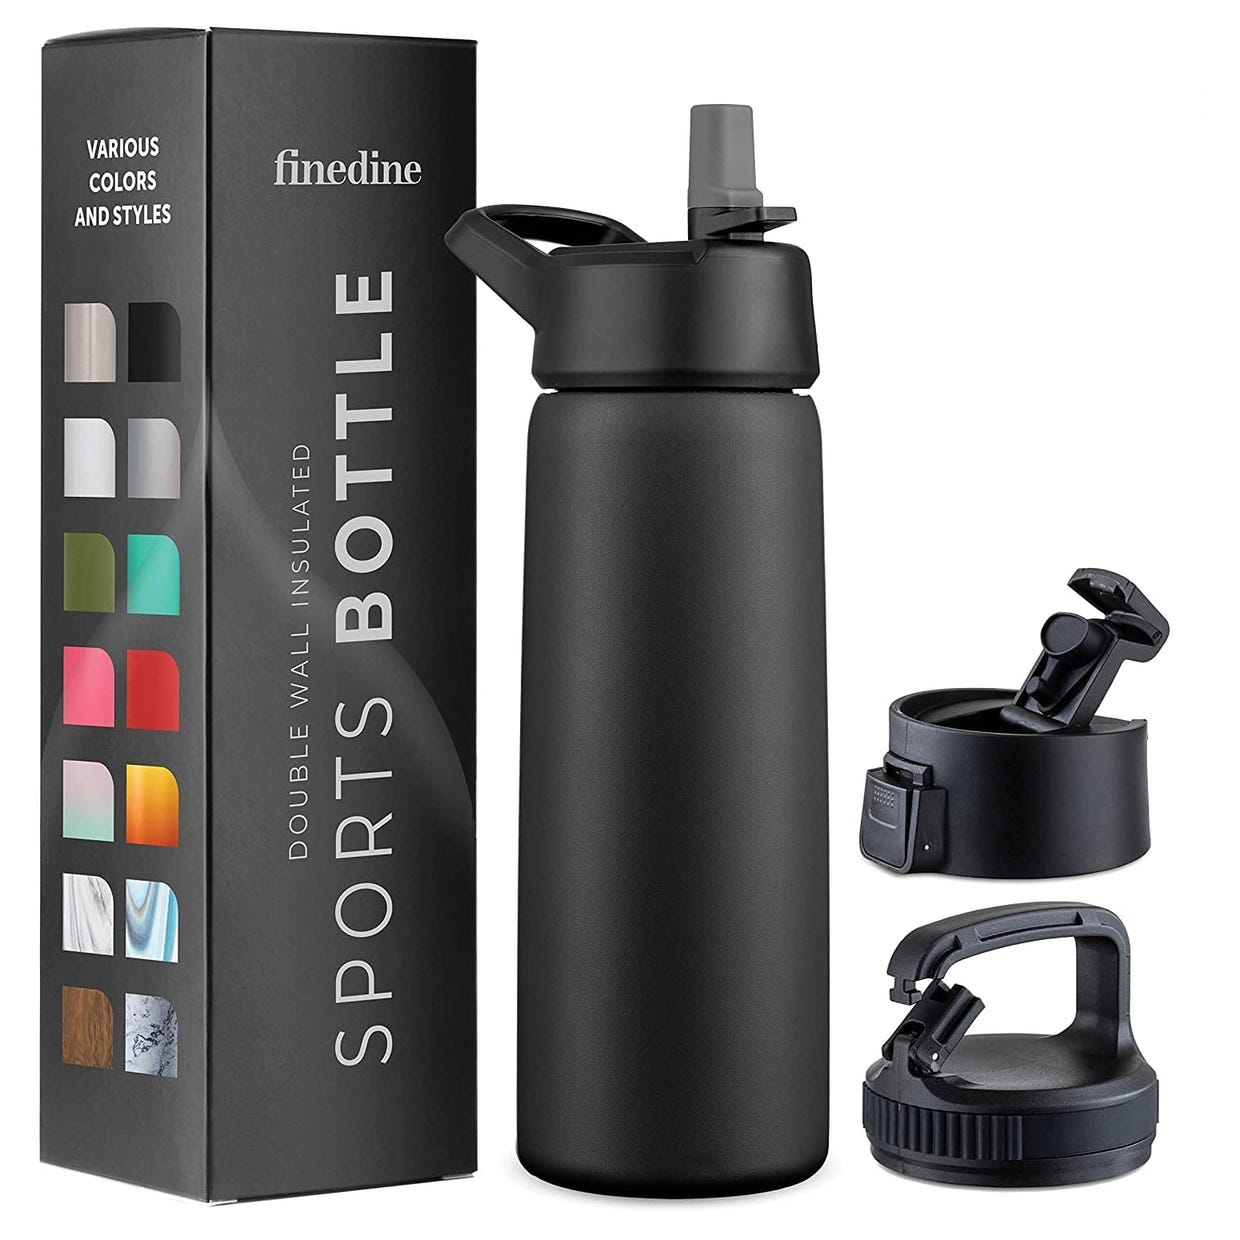 Black insulated sports bottle with a flip-top lid, next to its packaging showcasing color options.